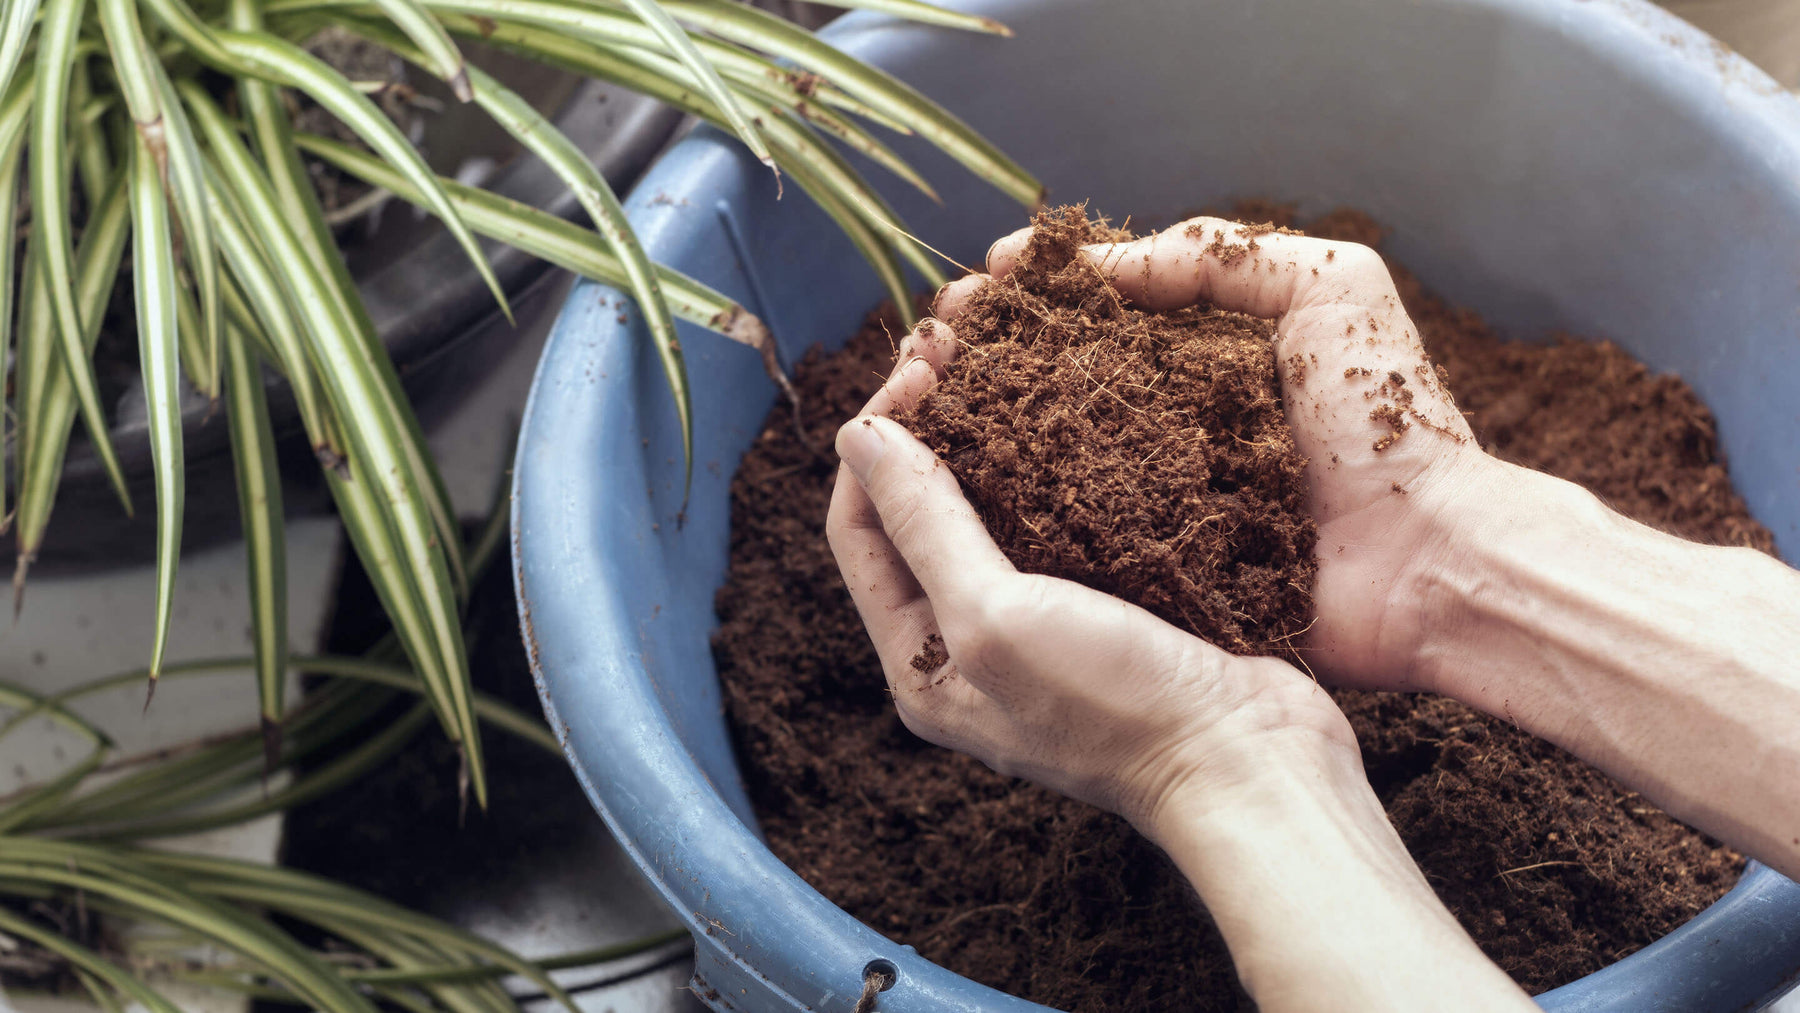 Close up of male hands holding coco coir over blue pot.